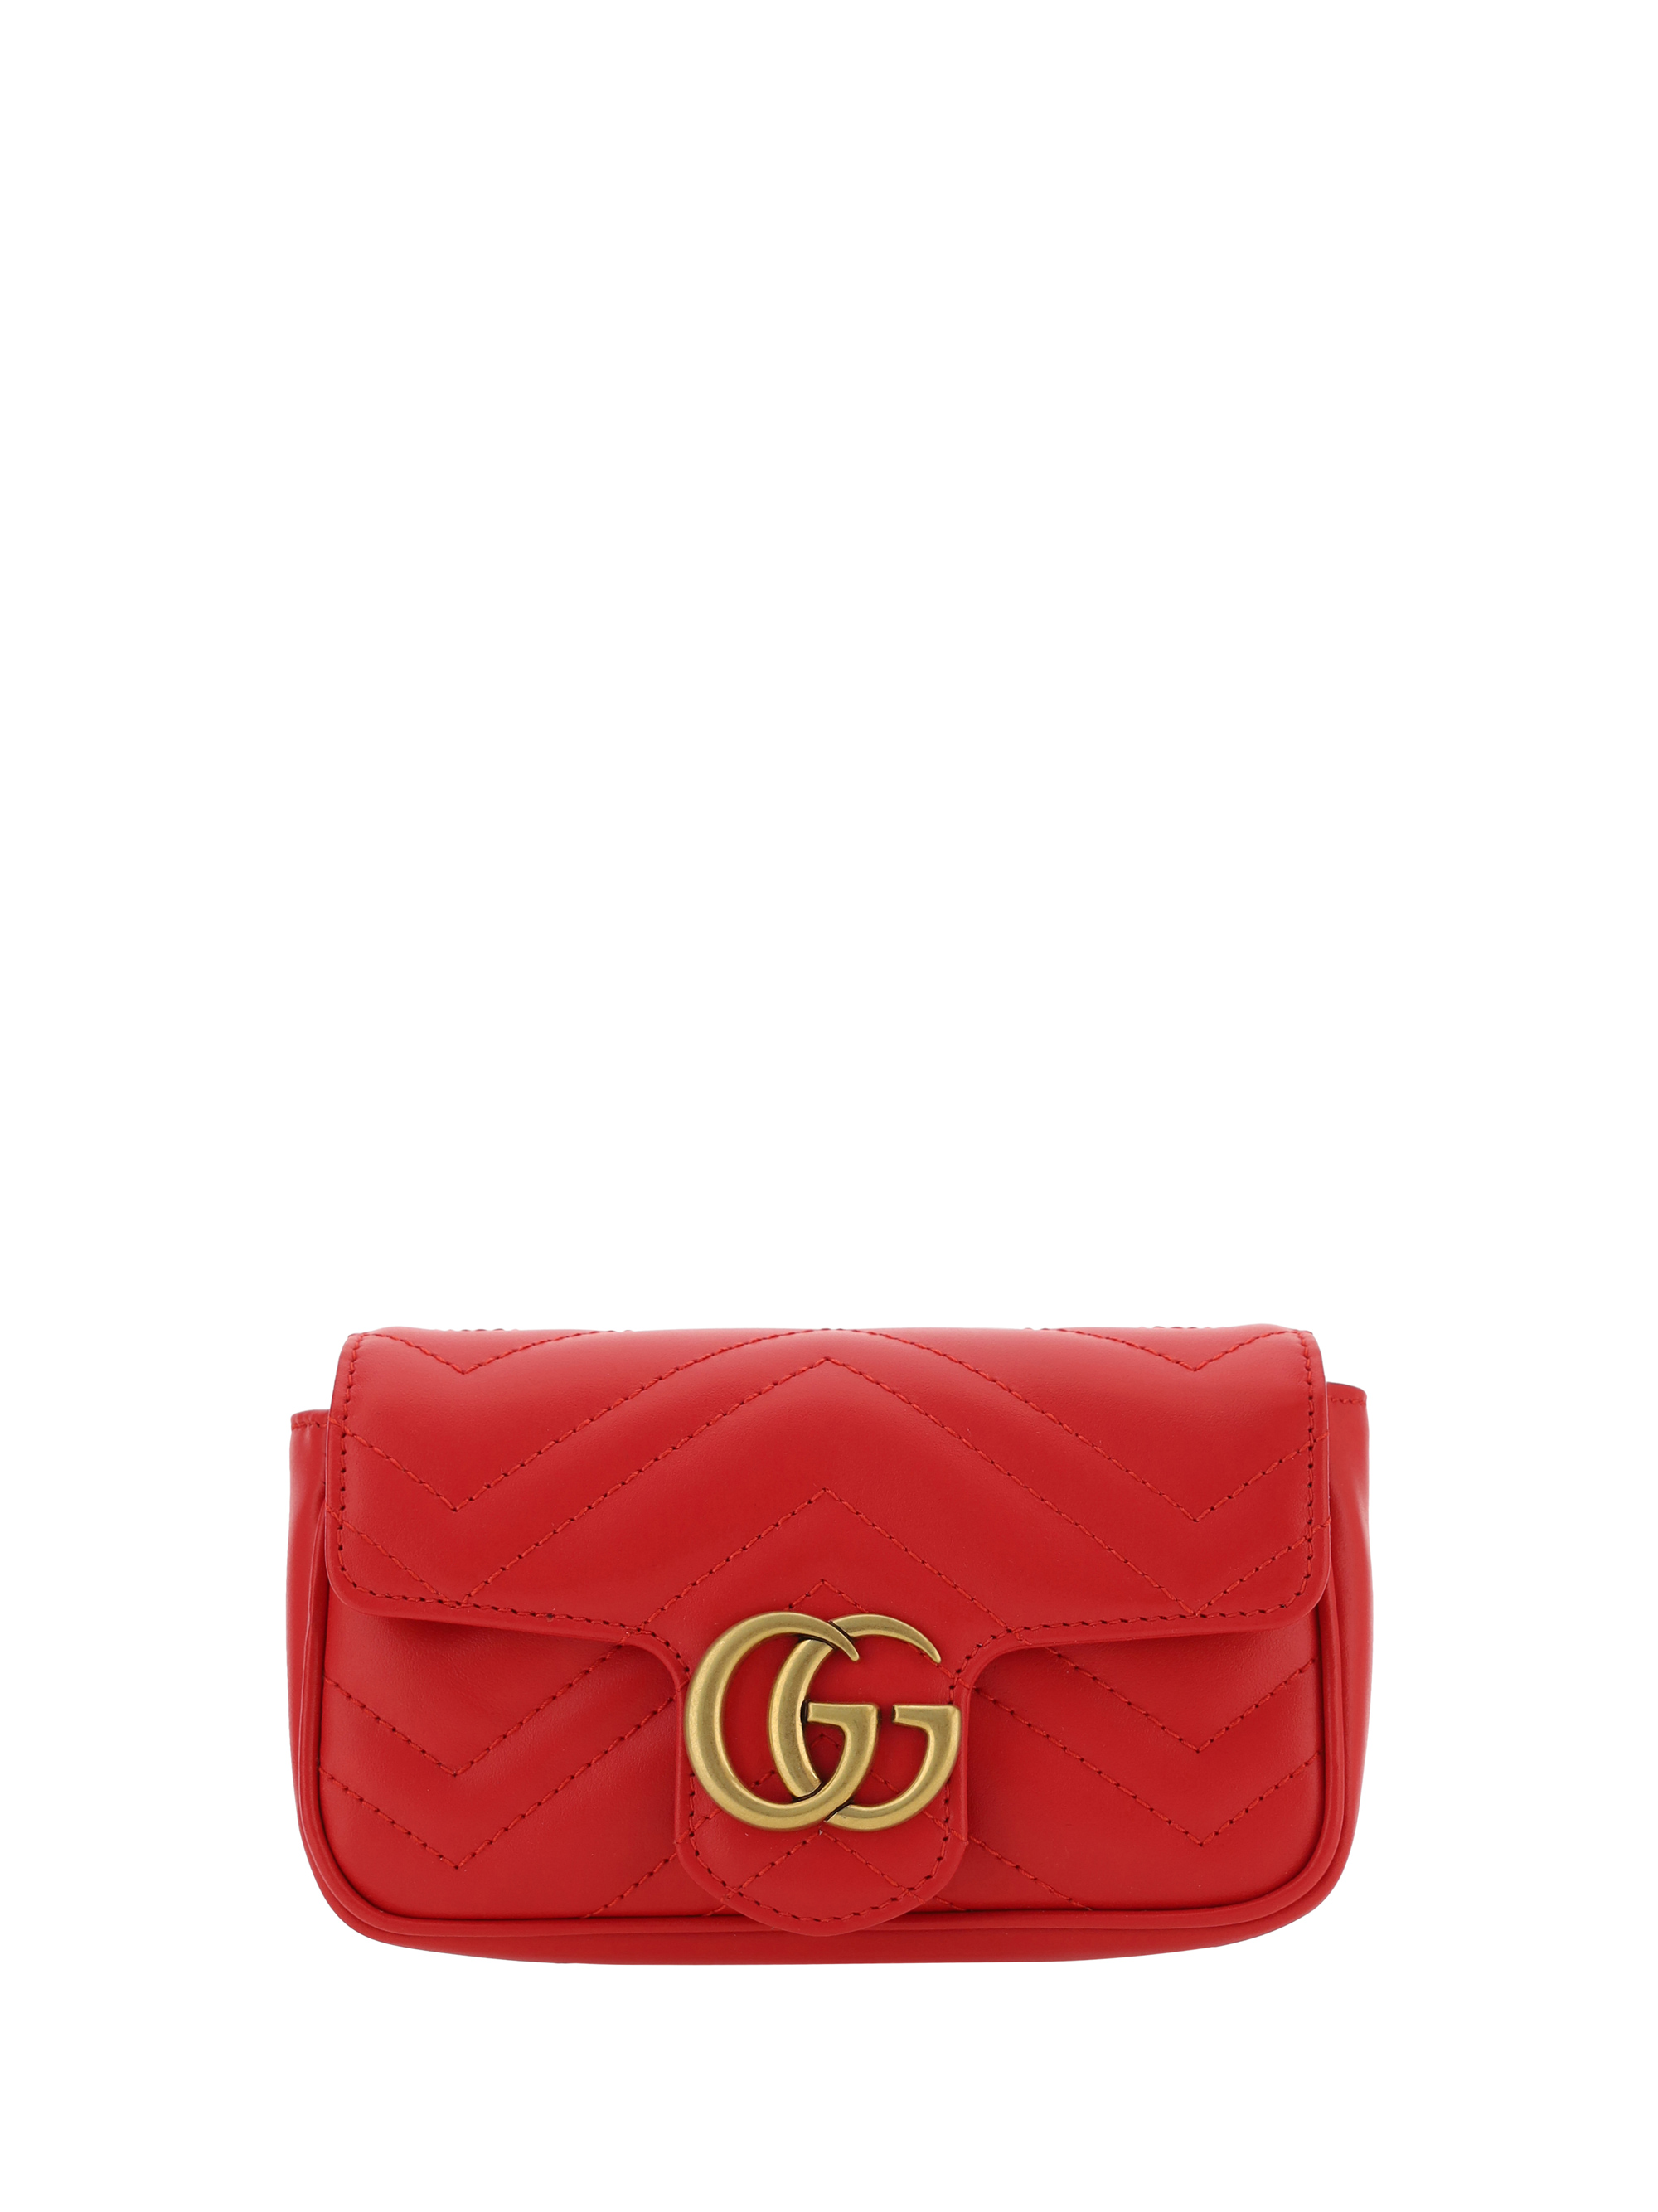 GG Marmont Mini Leather Shoulder Bag in Red - Gucci